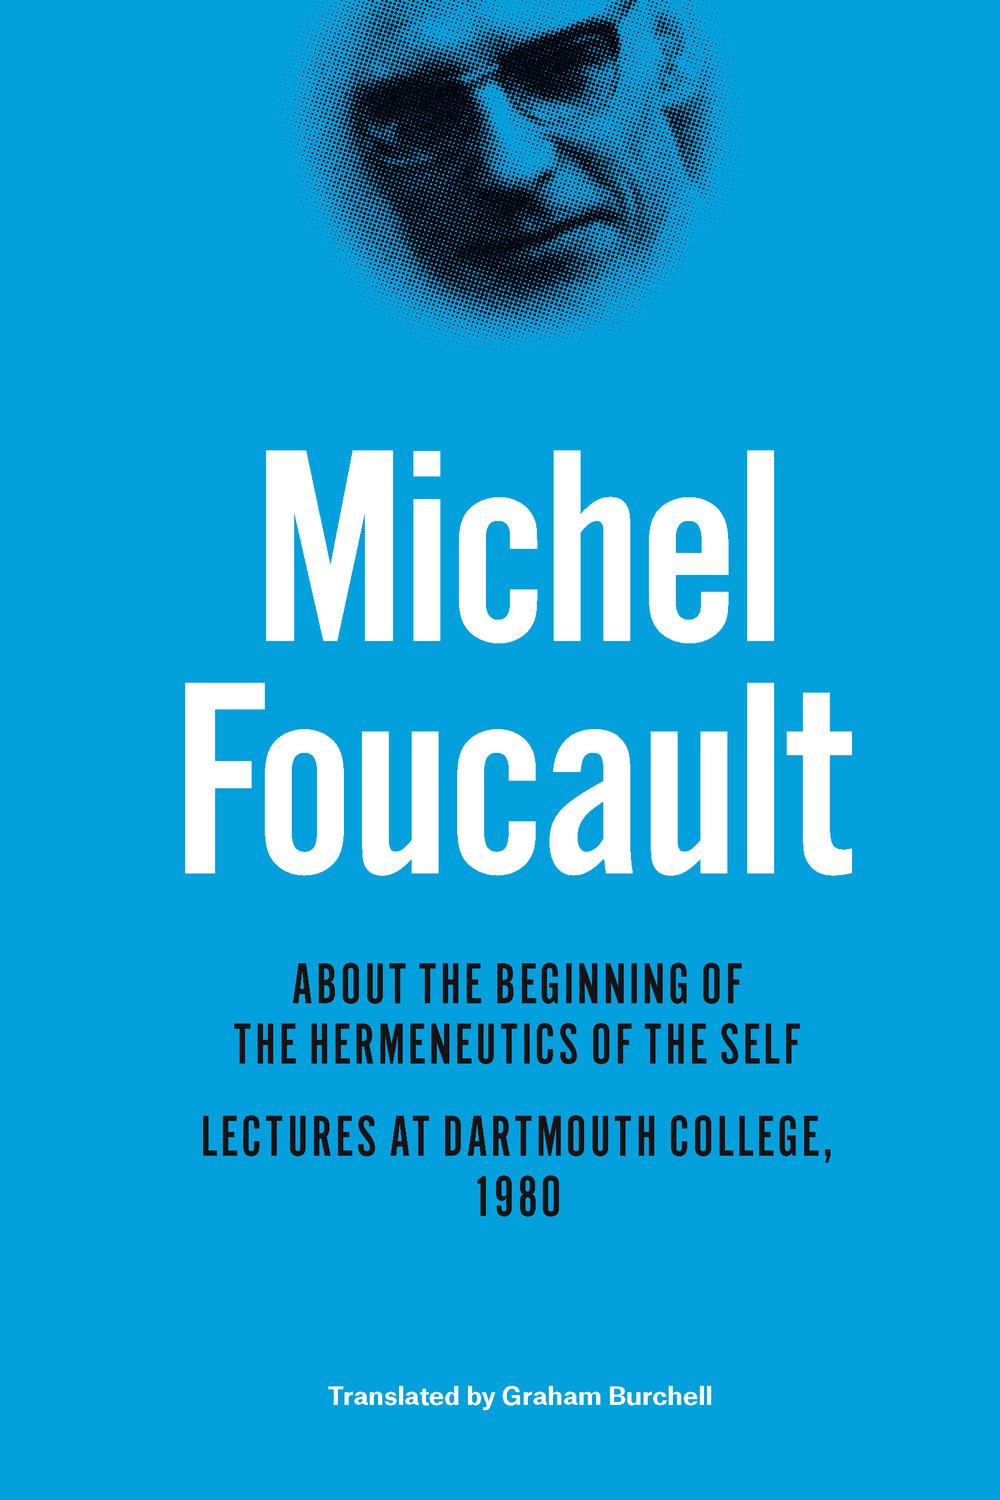 About the Beginning of the Hermeneutics of the Self - Michel Foucault